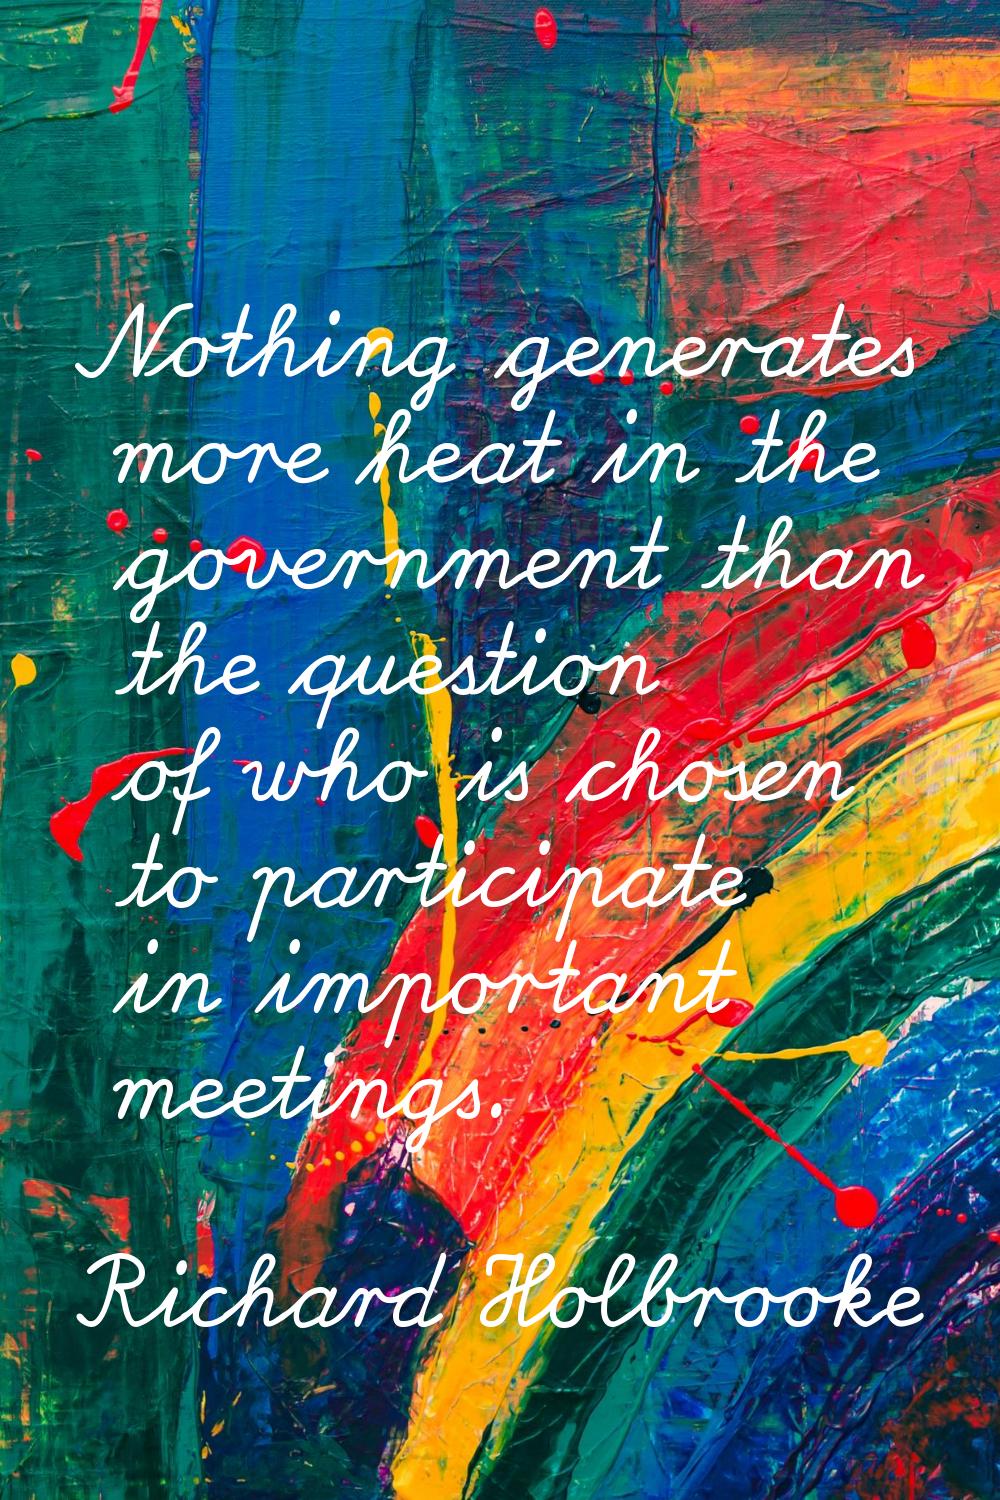 Nothing generates more heat in the government than the question of who is chosen to participate in 